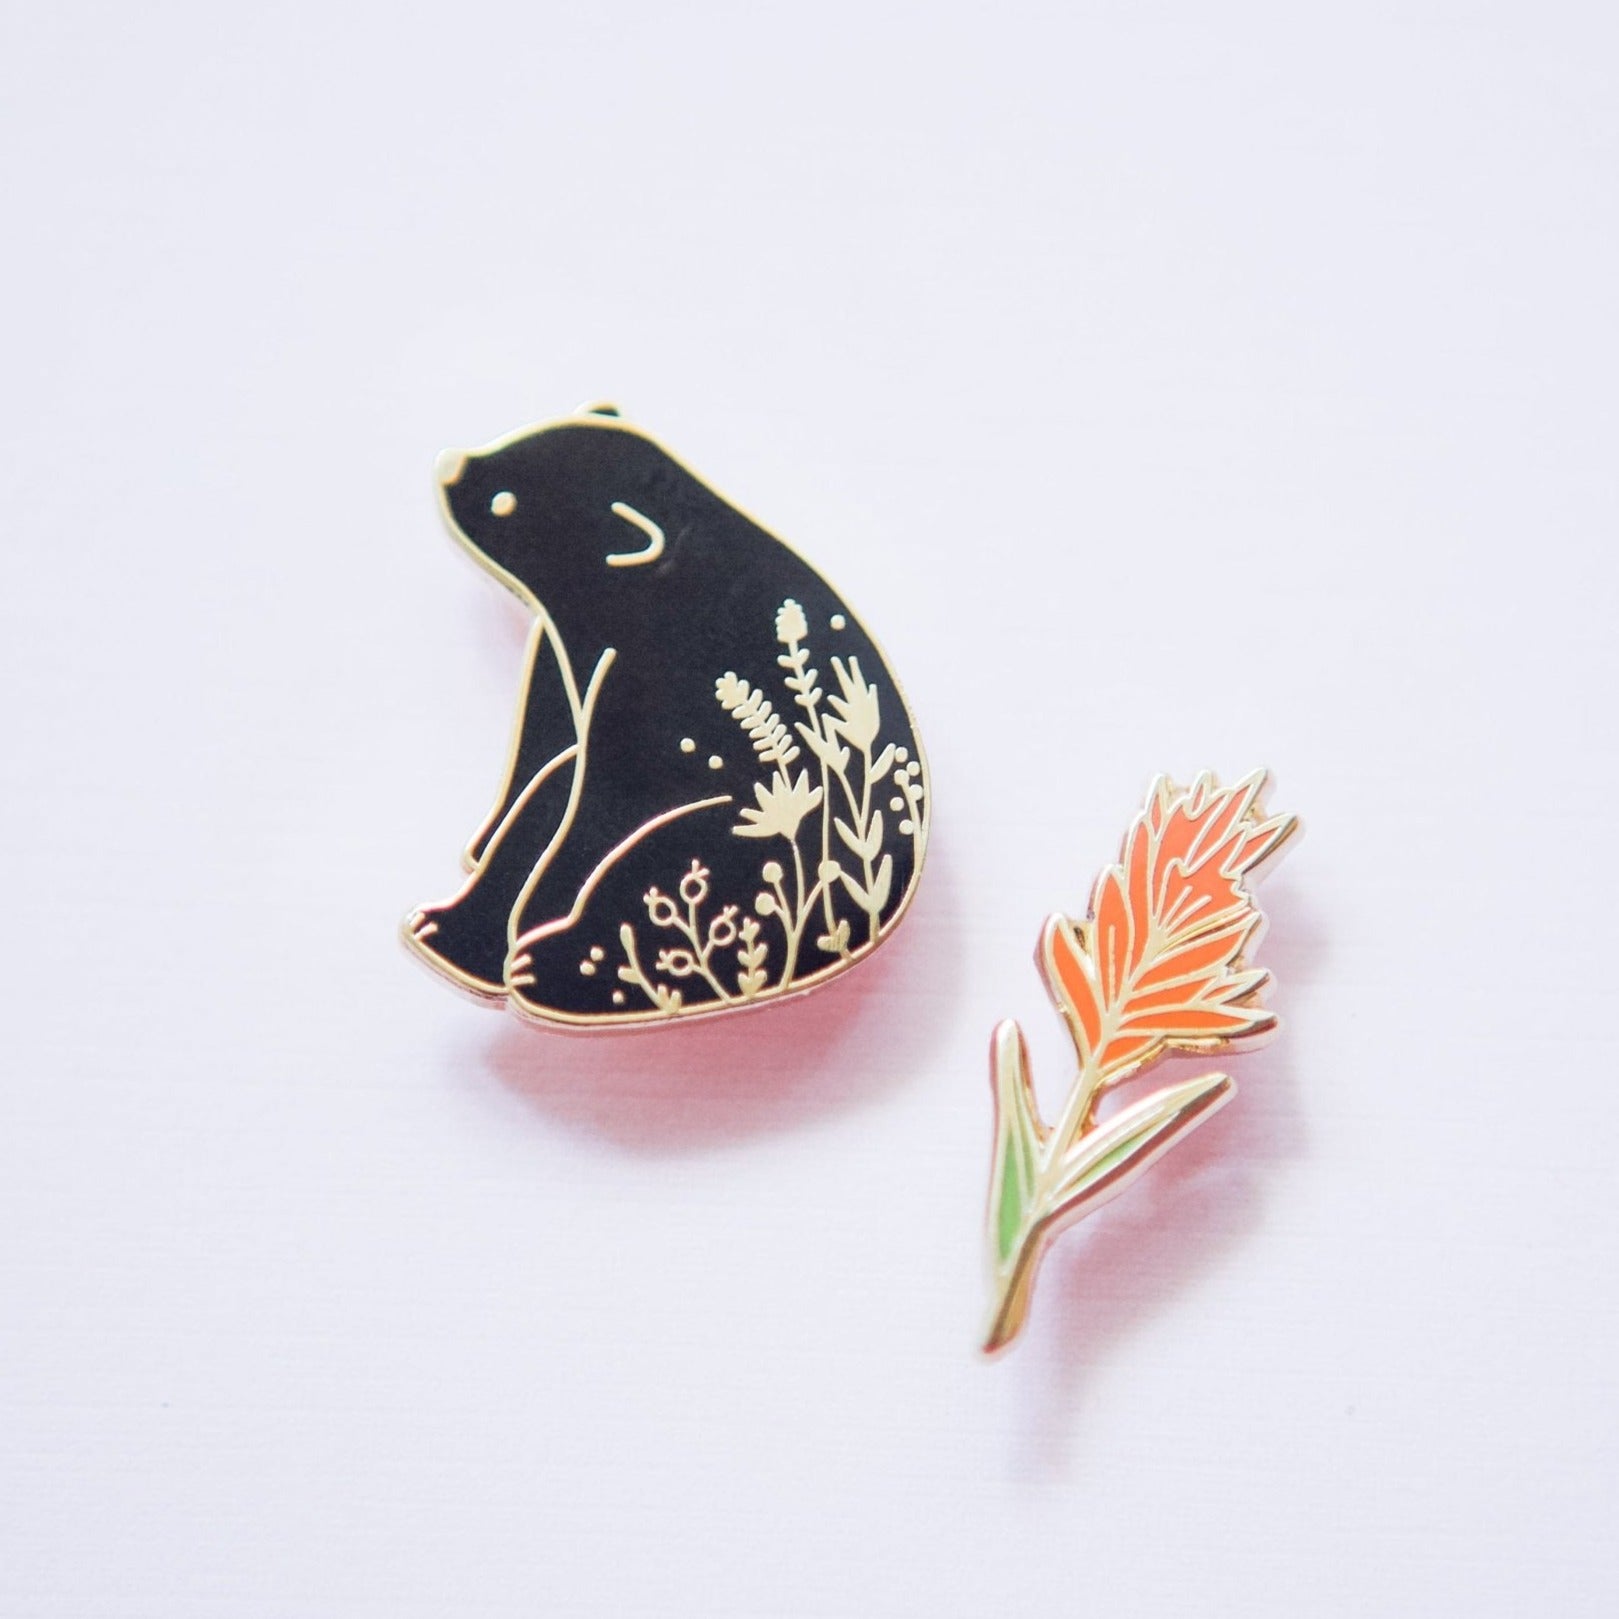 a hard enamel pin of a black bear sitting in a field of wildflowers. Enamel pins are collectible and quality additions to backpacks, hats, totes, lapels, and jackets.